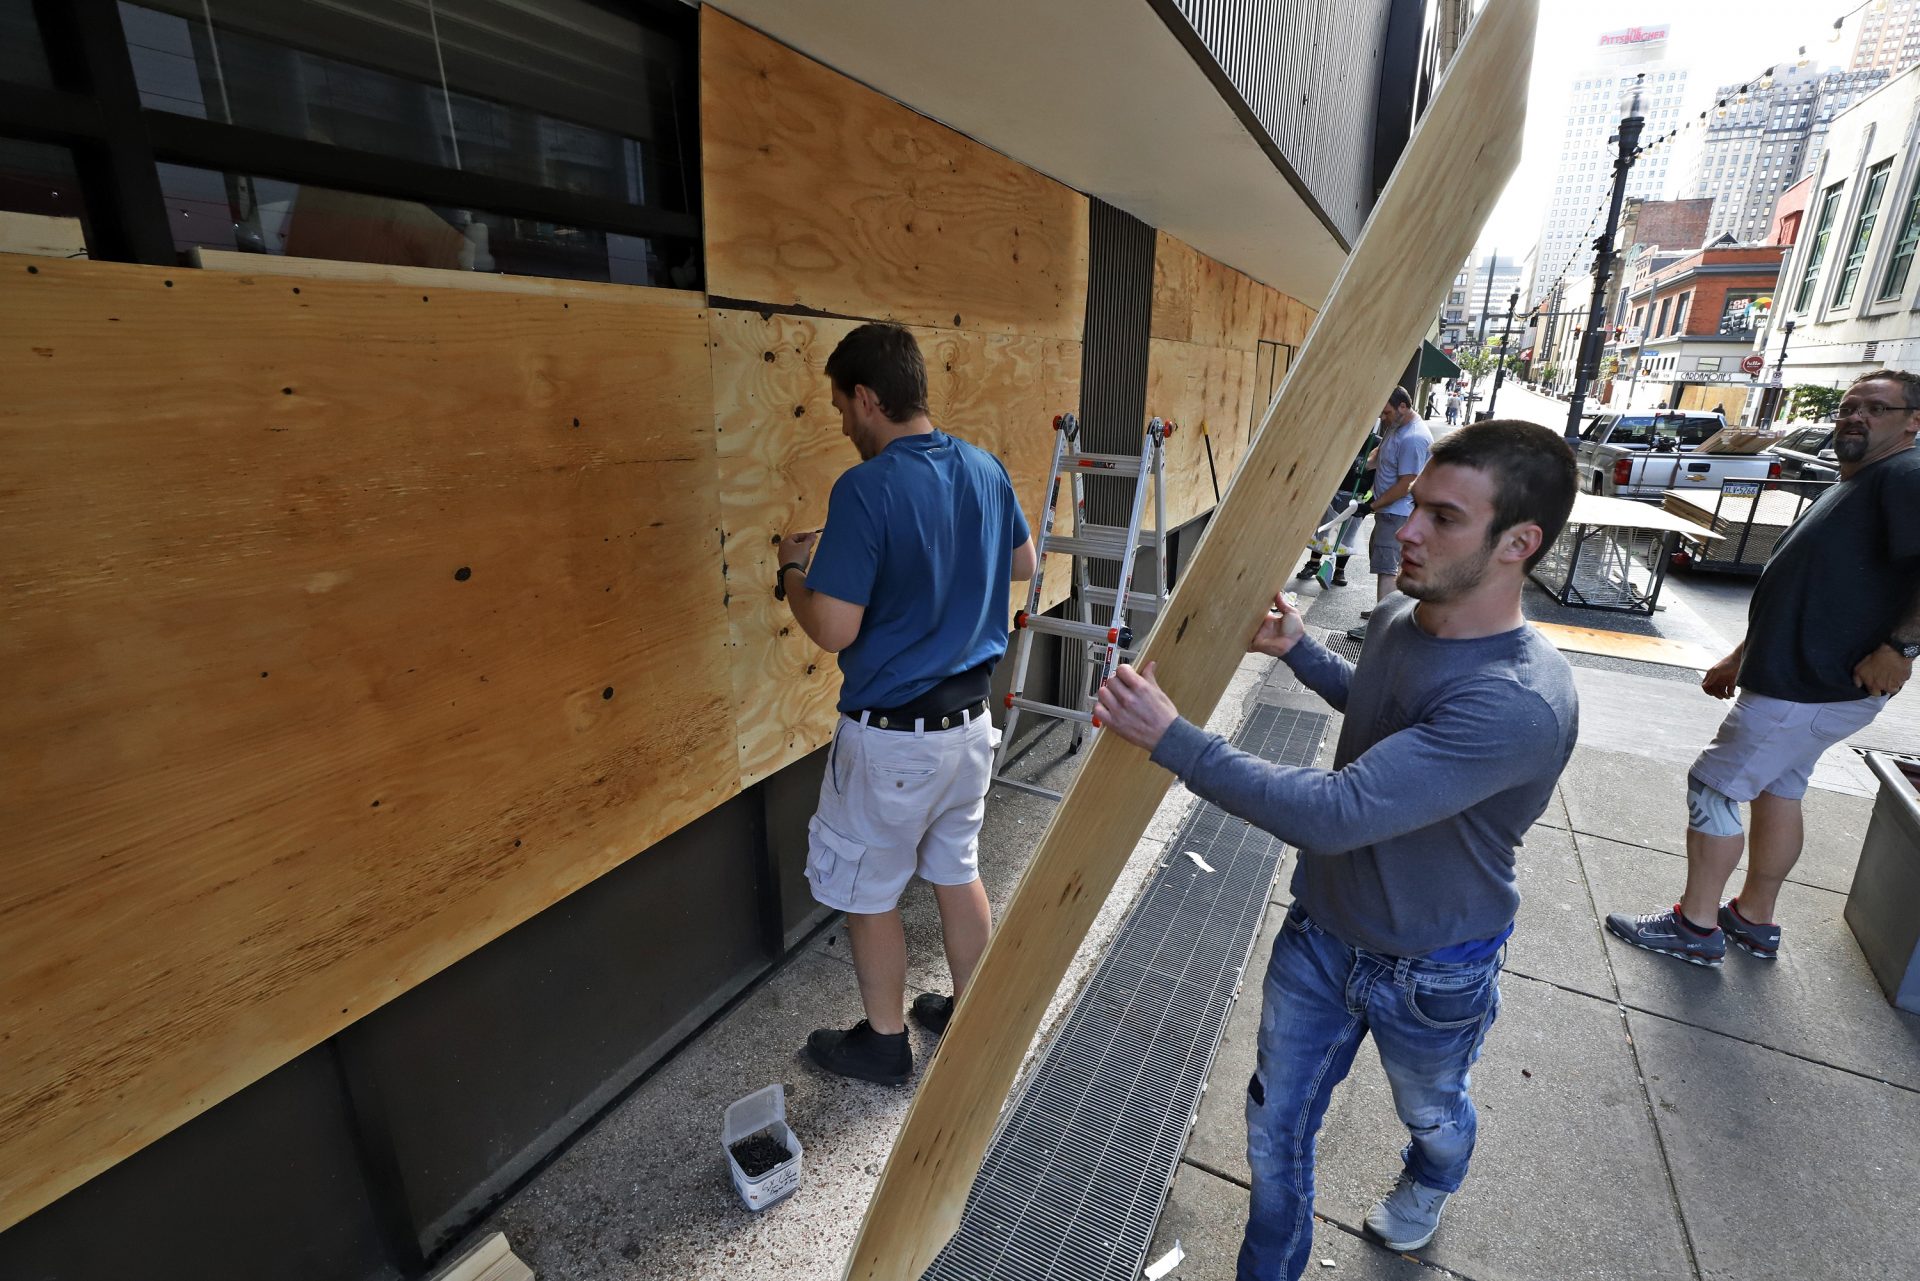 Windows broken in a downtown Pittsburgh CVS Pharmacy are repaired Sunday, May 31, 2020. The damage was done a during a march in Pittsburgh, Saturday, May 30, 2020 to protest the death of George Floyd, who died after being restrained by Minneapolis police officers on Memorial Day, May 25.